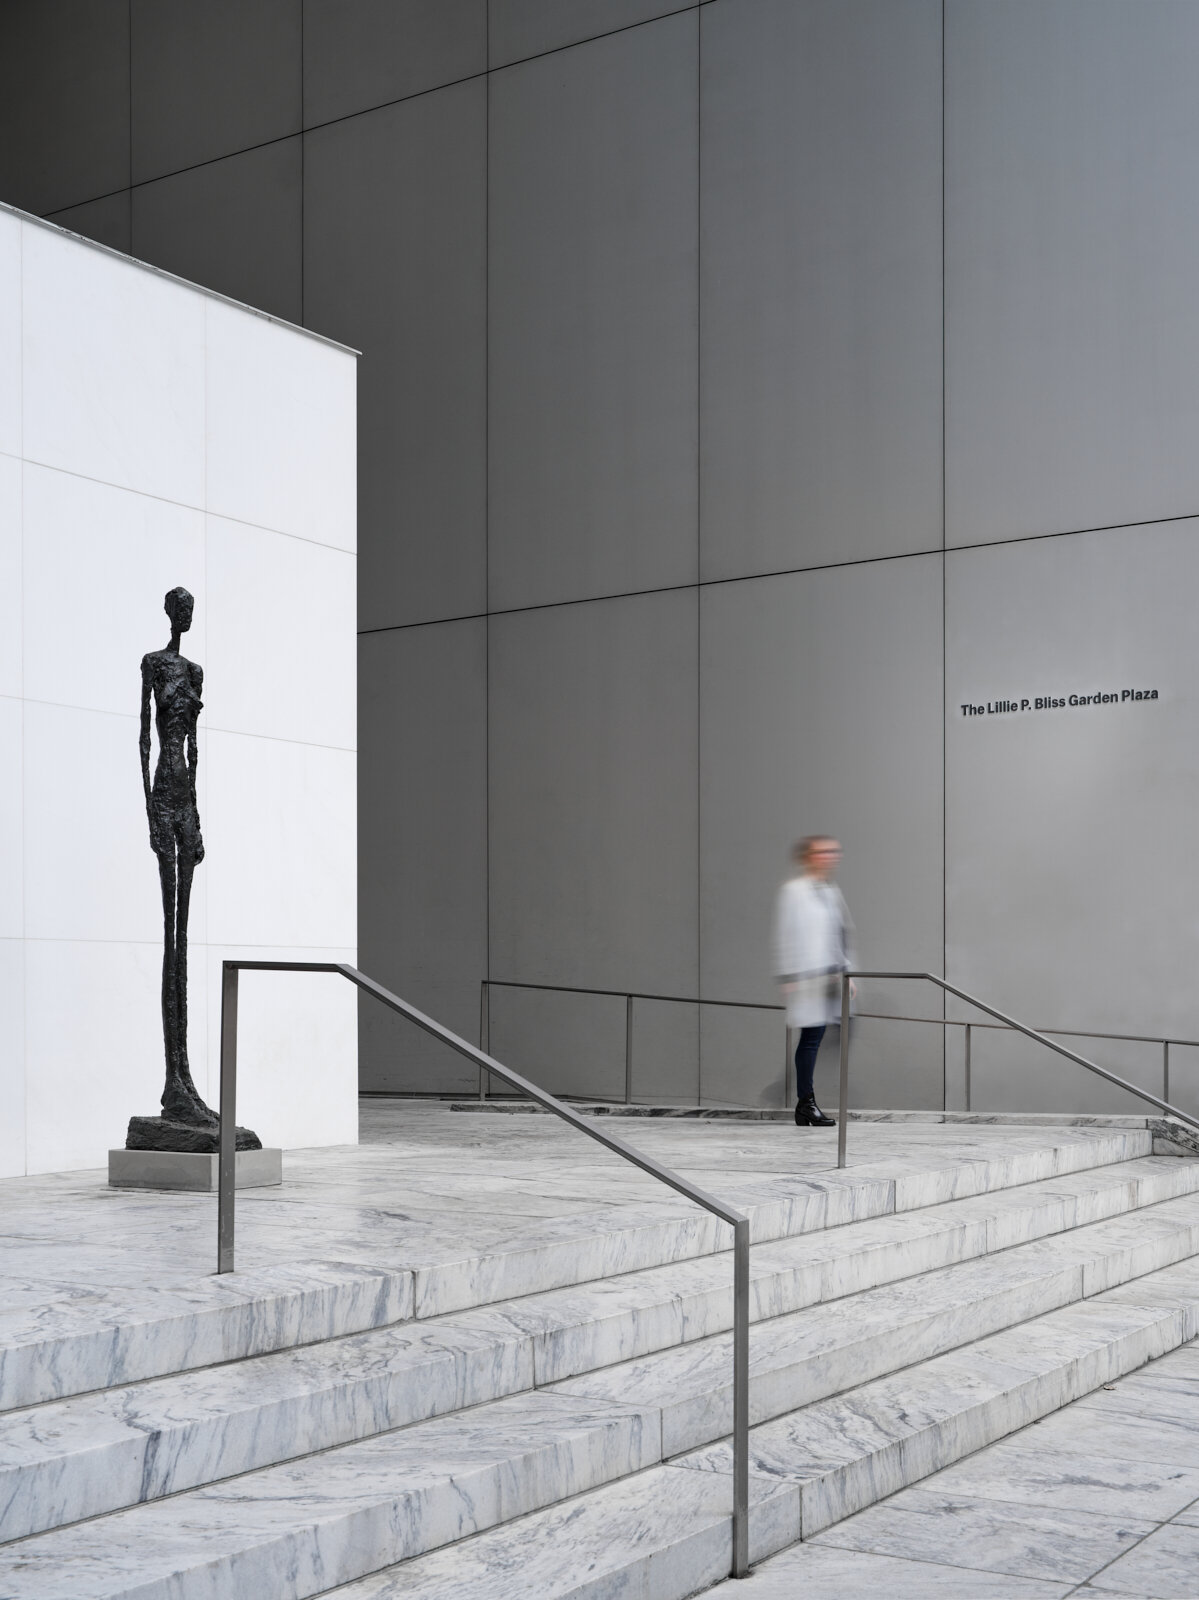  MoMa museum designed by Diller Scofidio &amp; Renfro architects. Interior design and branding by Gensler. Photographed by award winning architectural photographer Inessa Binenbaum 